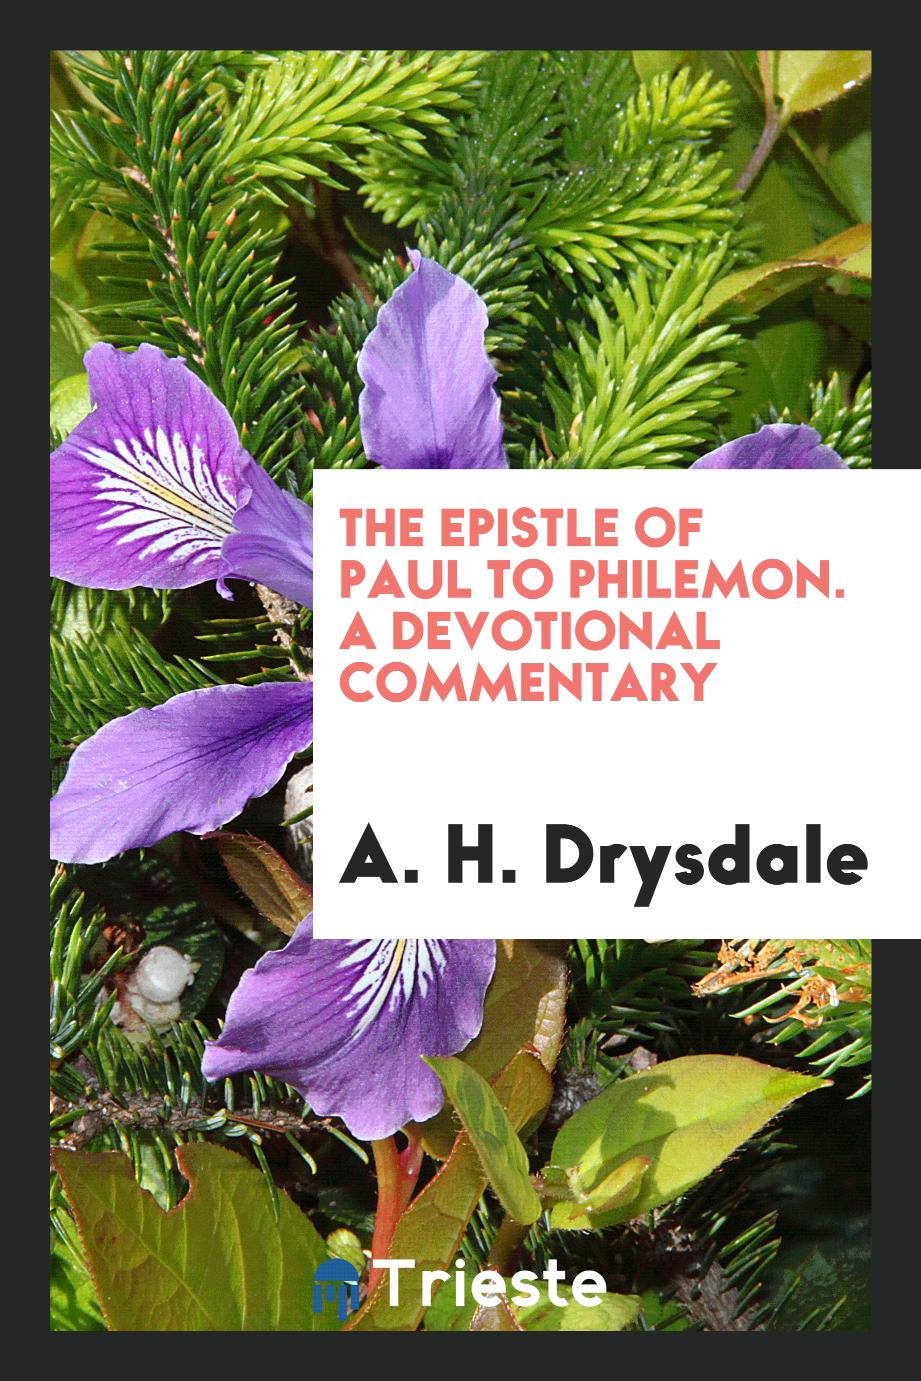 The Epistle of Paul to Philemon. A devotional commentary